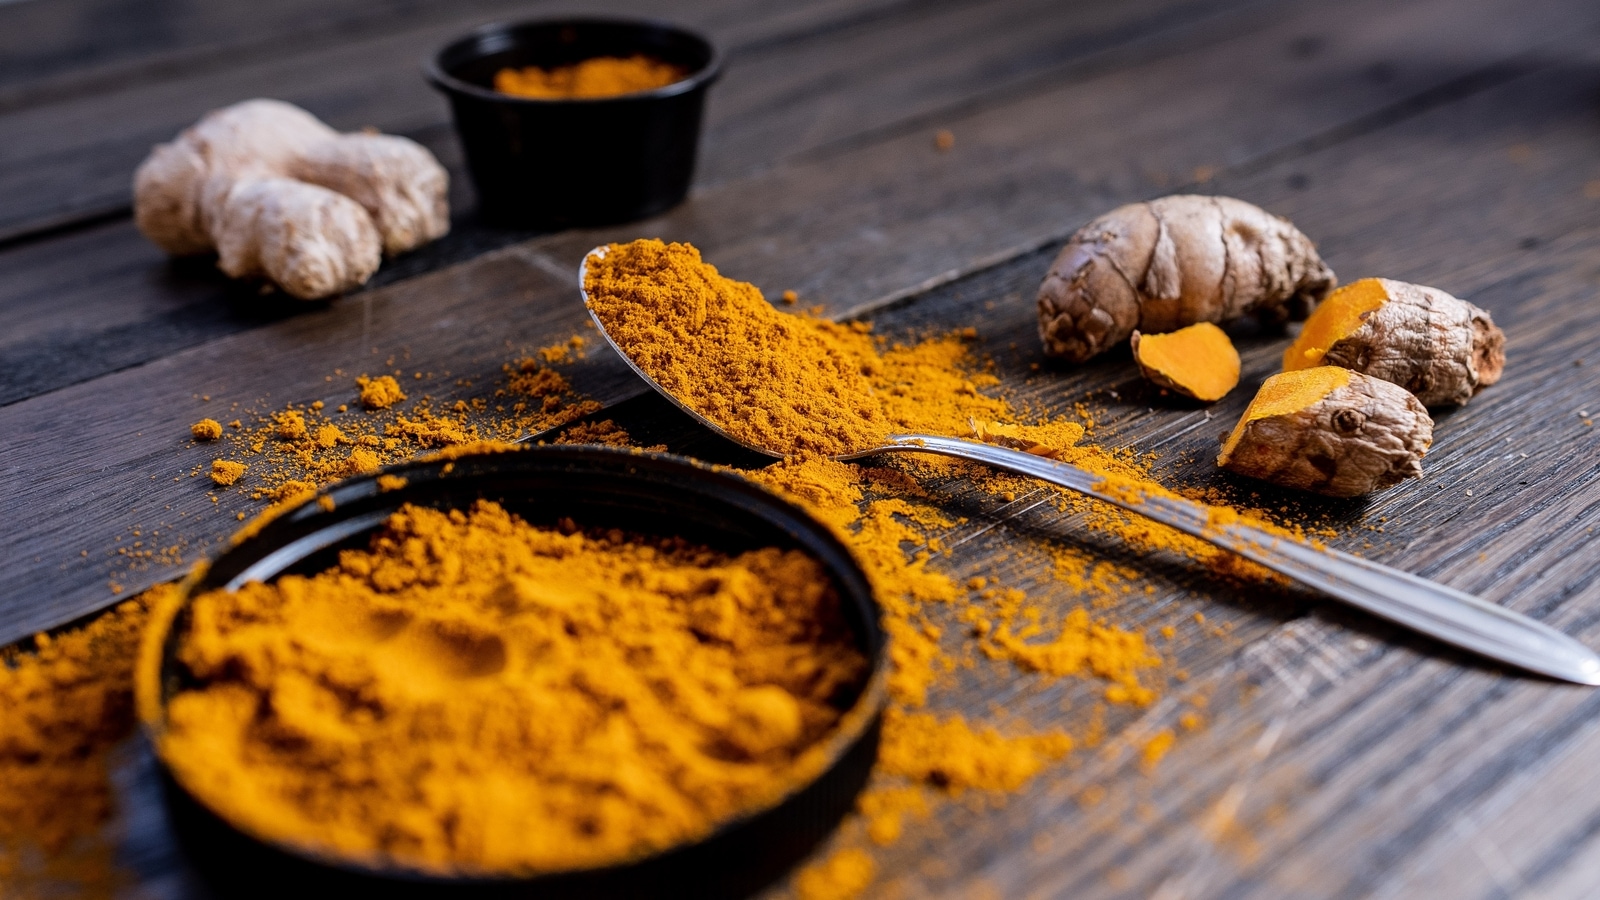 Anti-ageing, wound healing, skin lightening and other benefits of curcumin  | Health - Hindustan Times